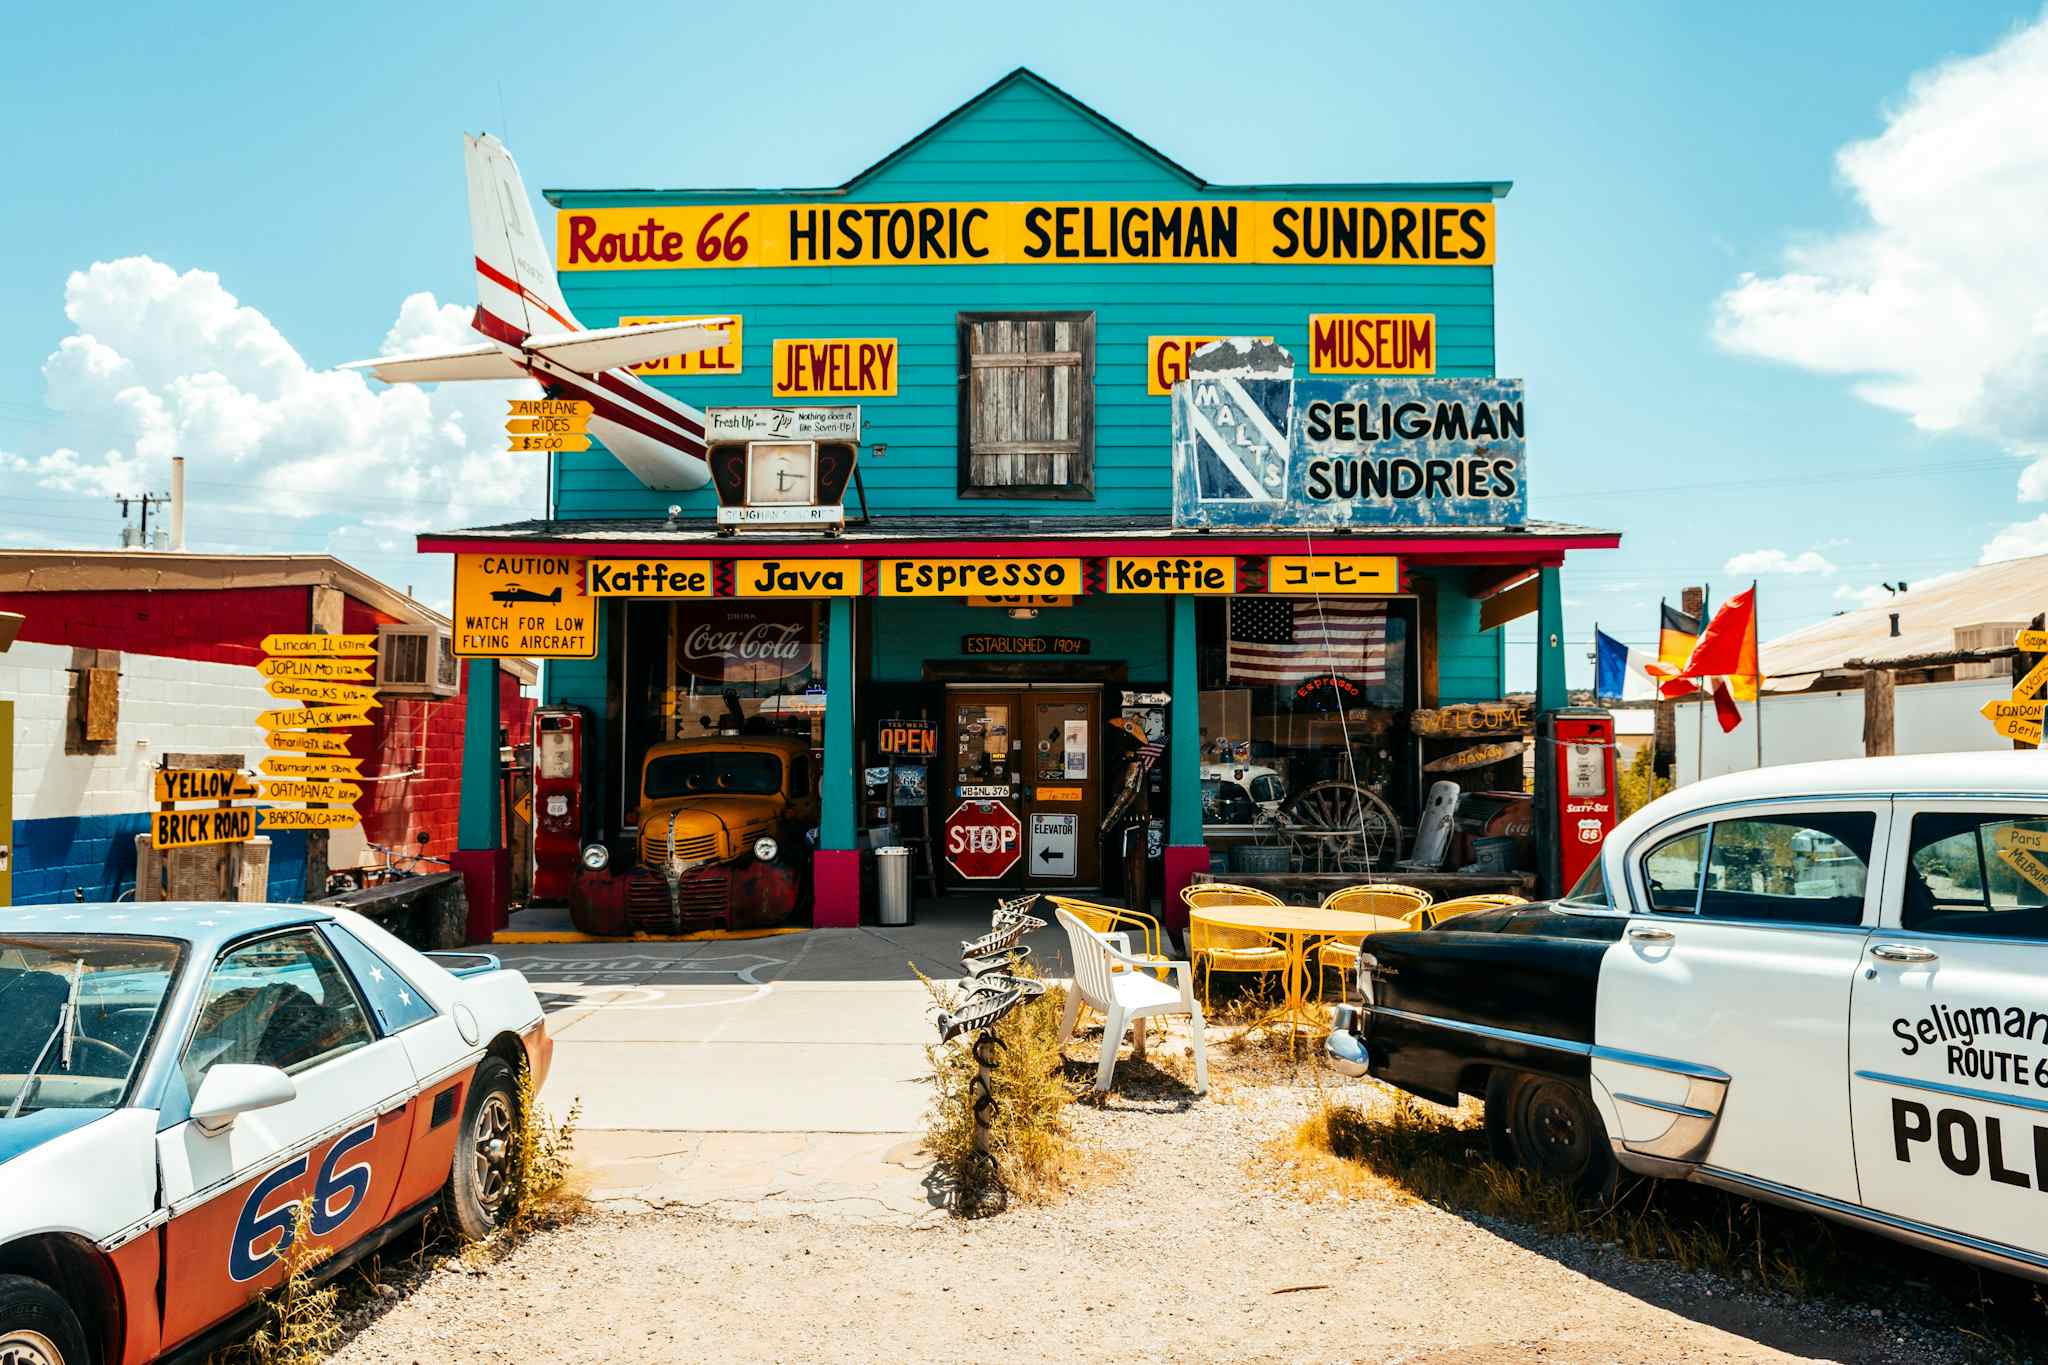 Famous Seligman town of Route 66, Arizona
Shutterstock: 718975954